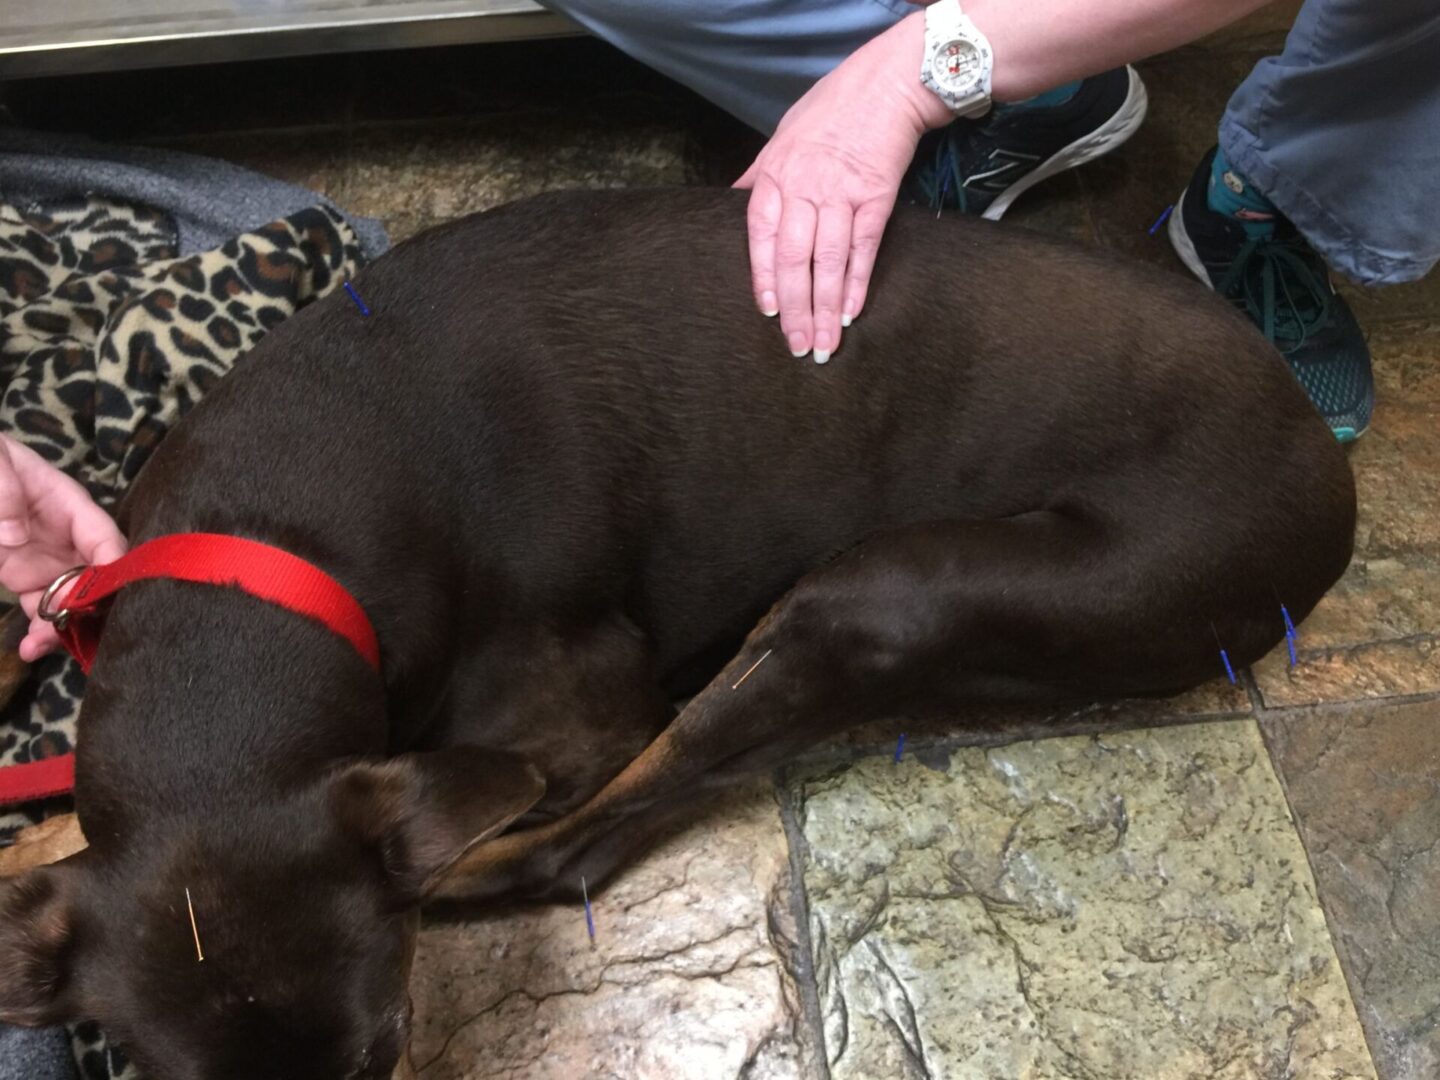 Veterinarian giving acupuncture treatment to dog